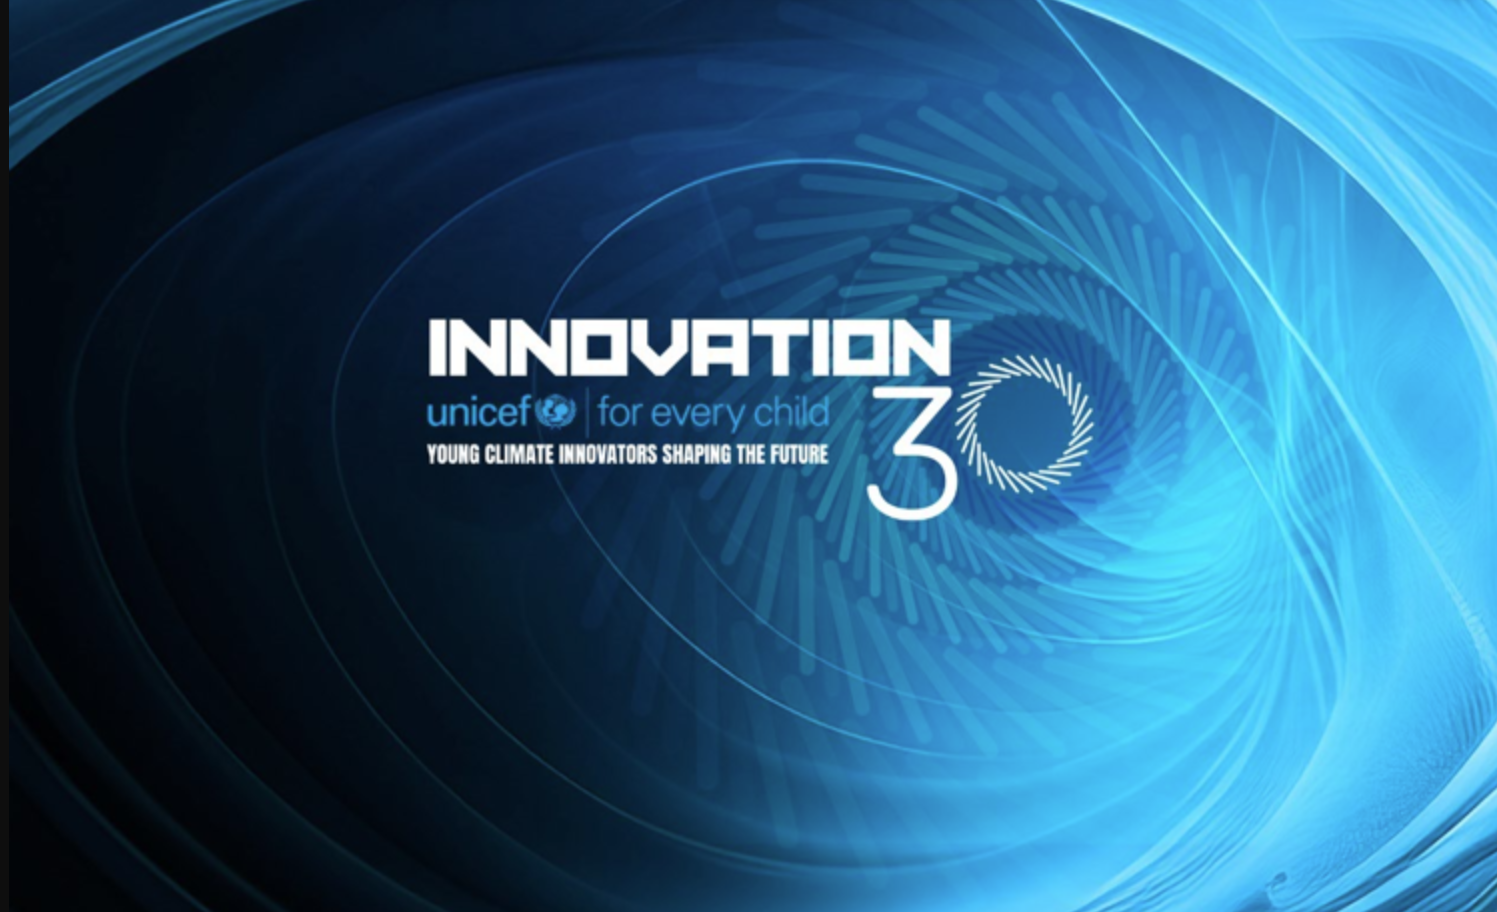 Innovation30: Unicef for Every Child